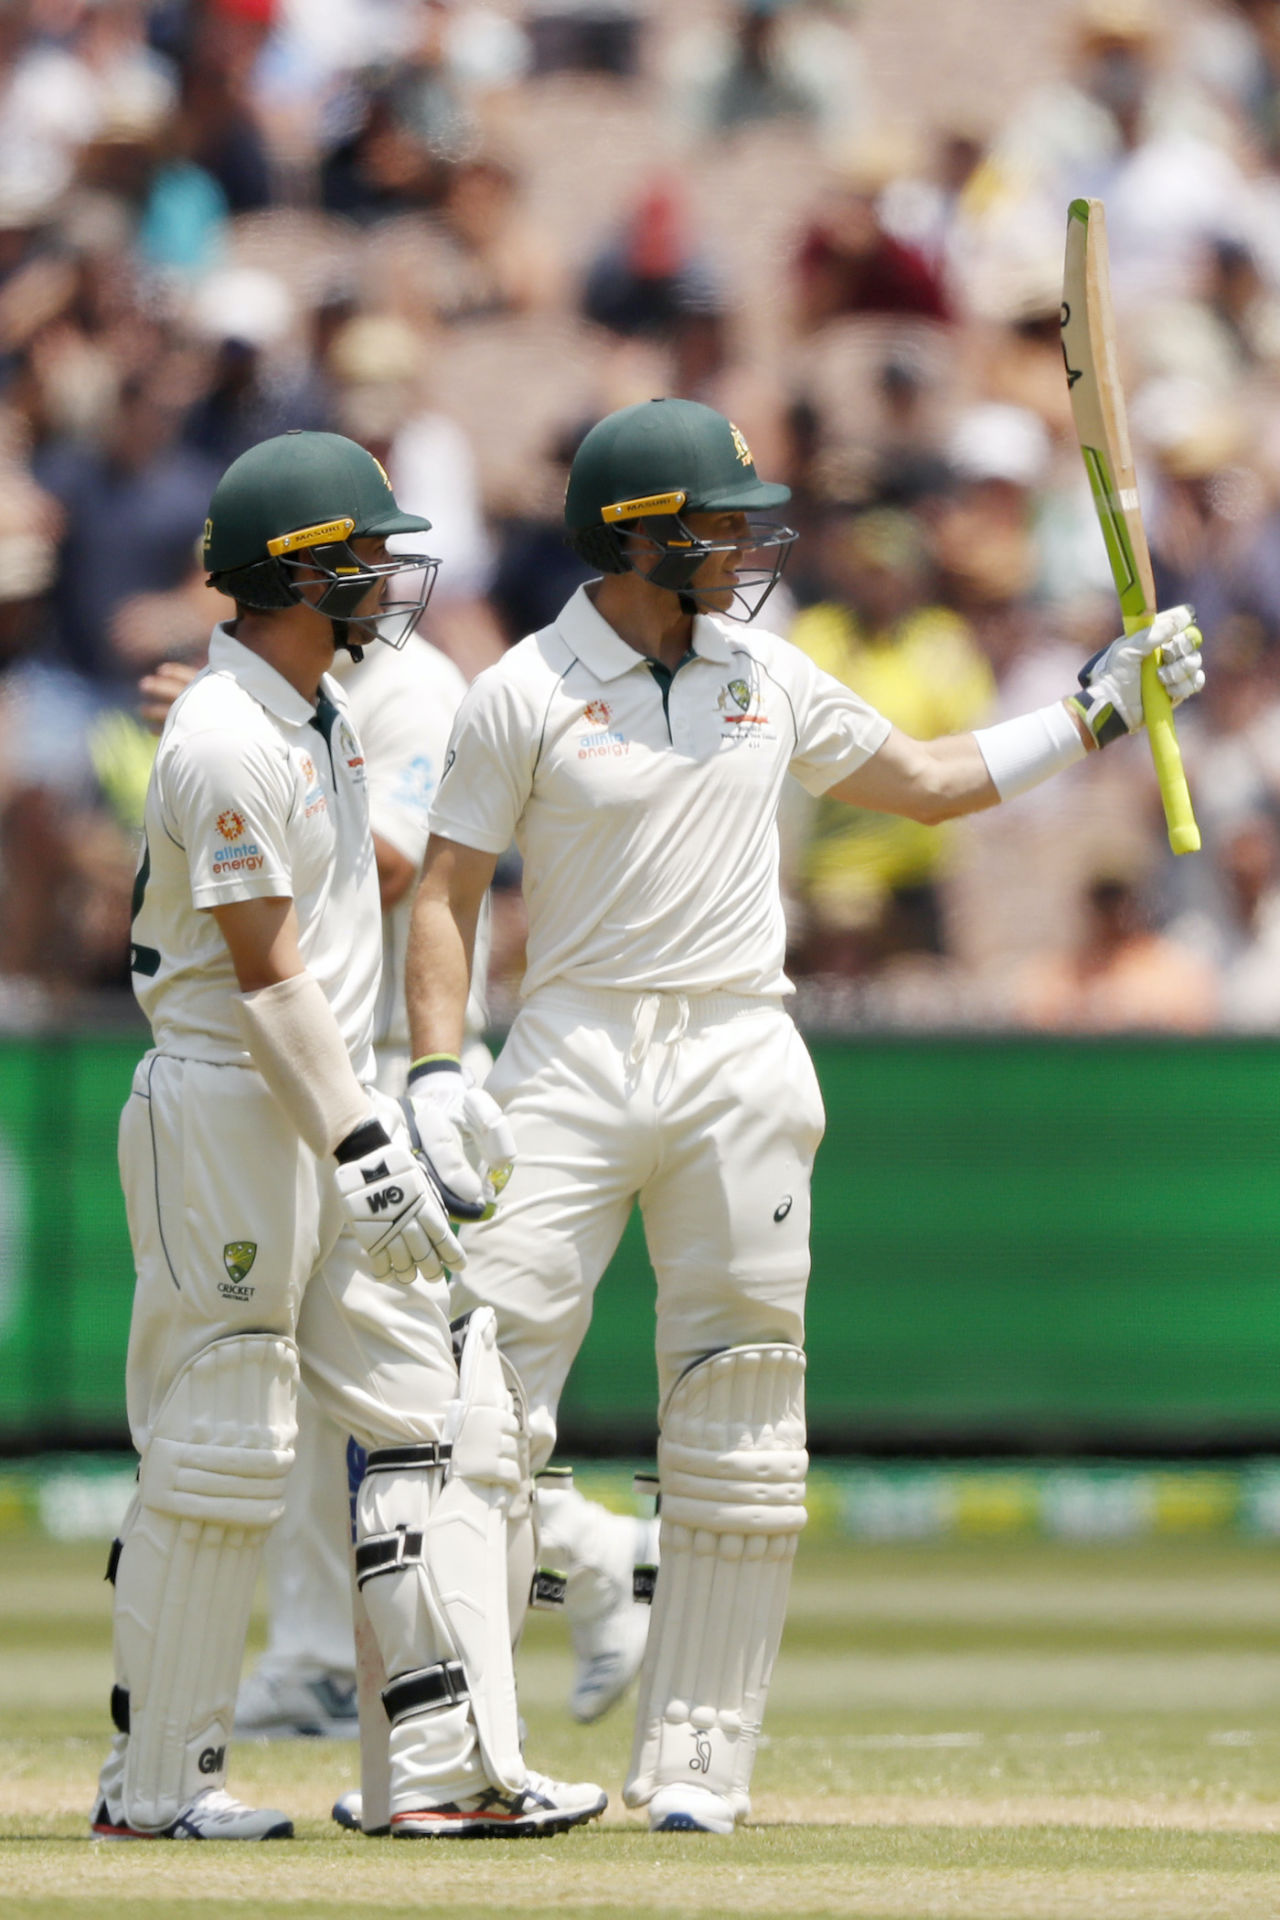 Tim Paine raises his bat after reaching fifty, Australia v New Zealand, 2nd Test, Melbourne, 2nd day, December 27, 2019